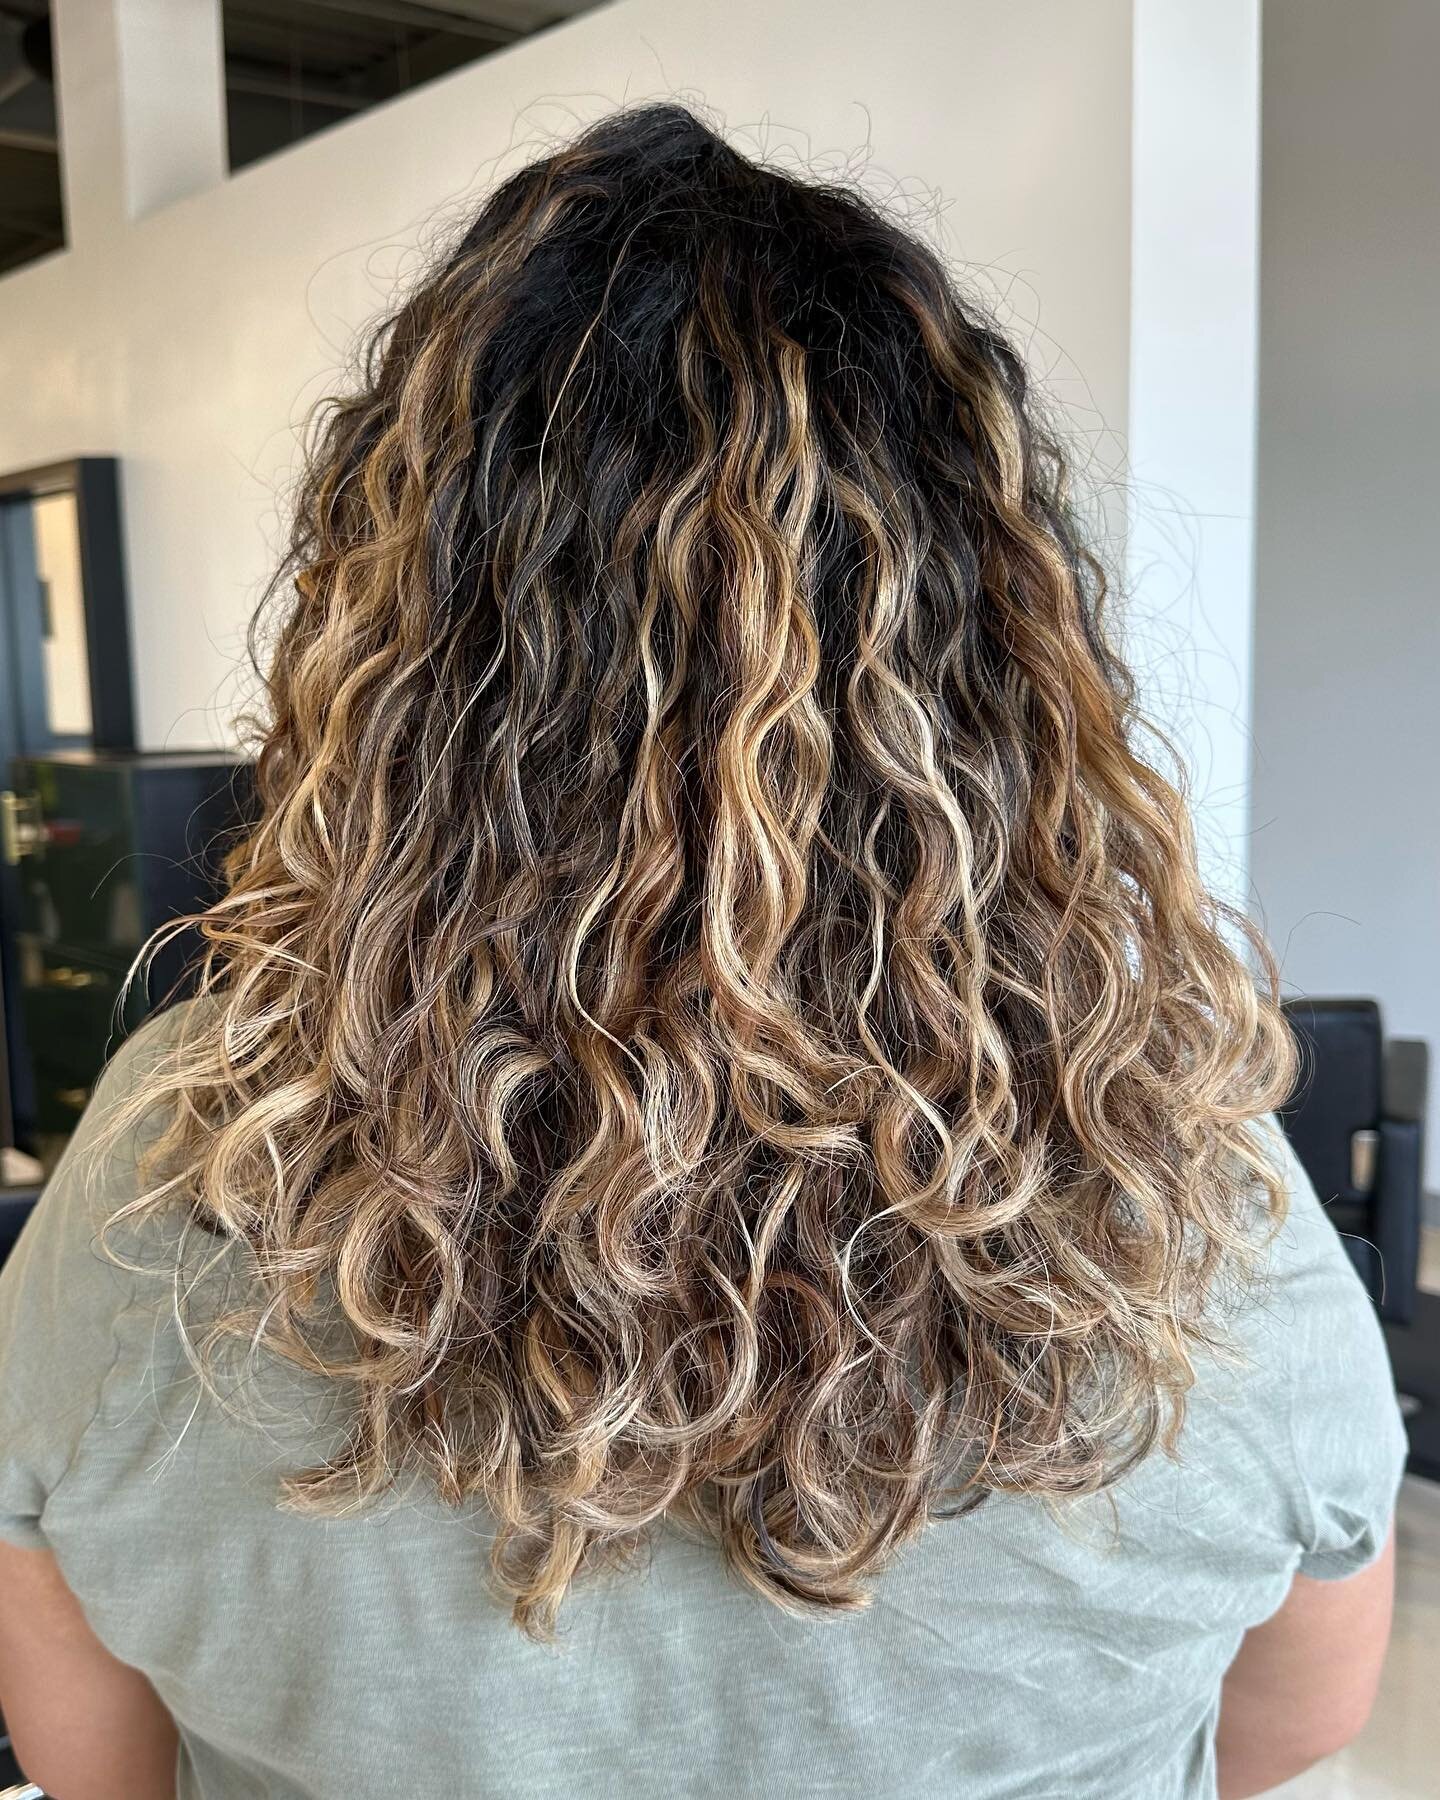 ⭐️Curl Recovery⭐️

My client came in wanting to focus on curl health and maintenance since blonding services in the past left her hair feeling dry and damaged her curl pattern. 

It will take time, patience and a solid at home curl care routine but i